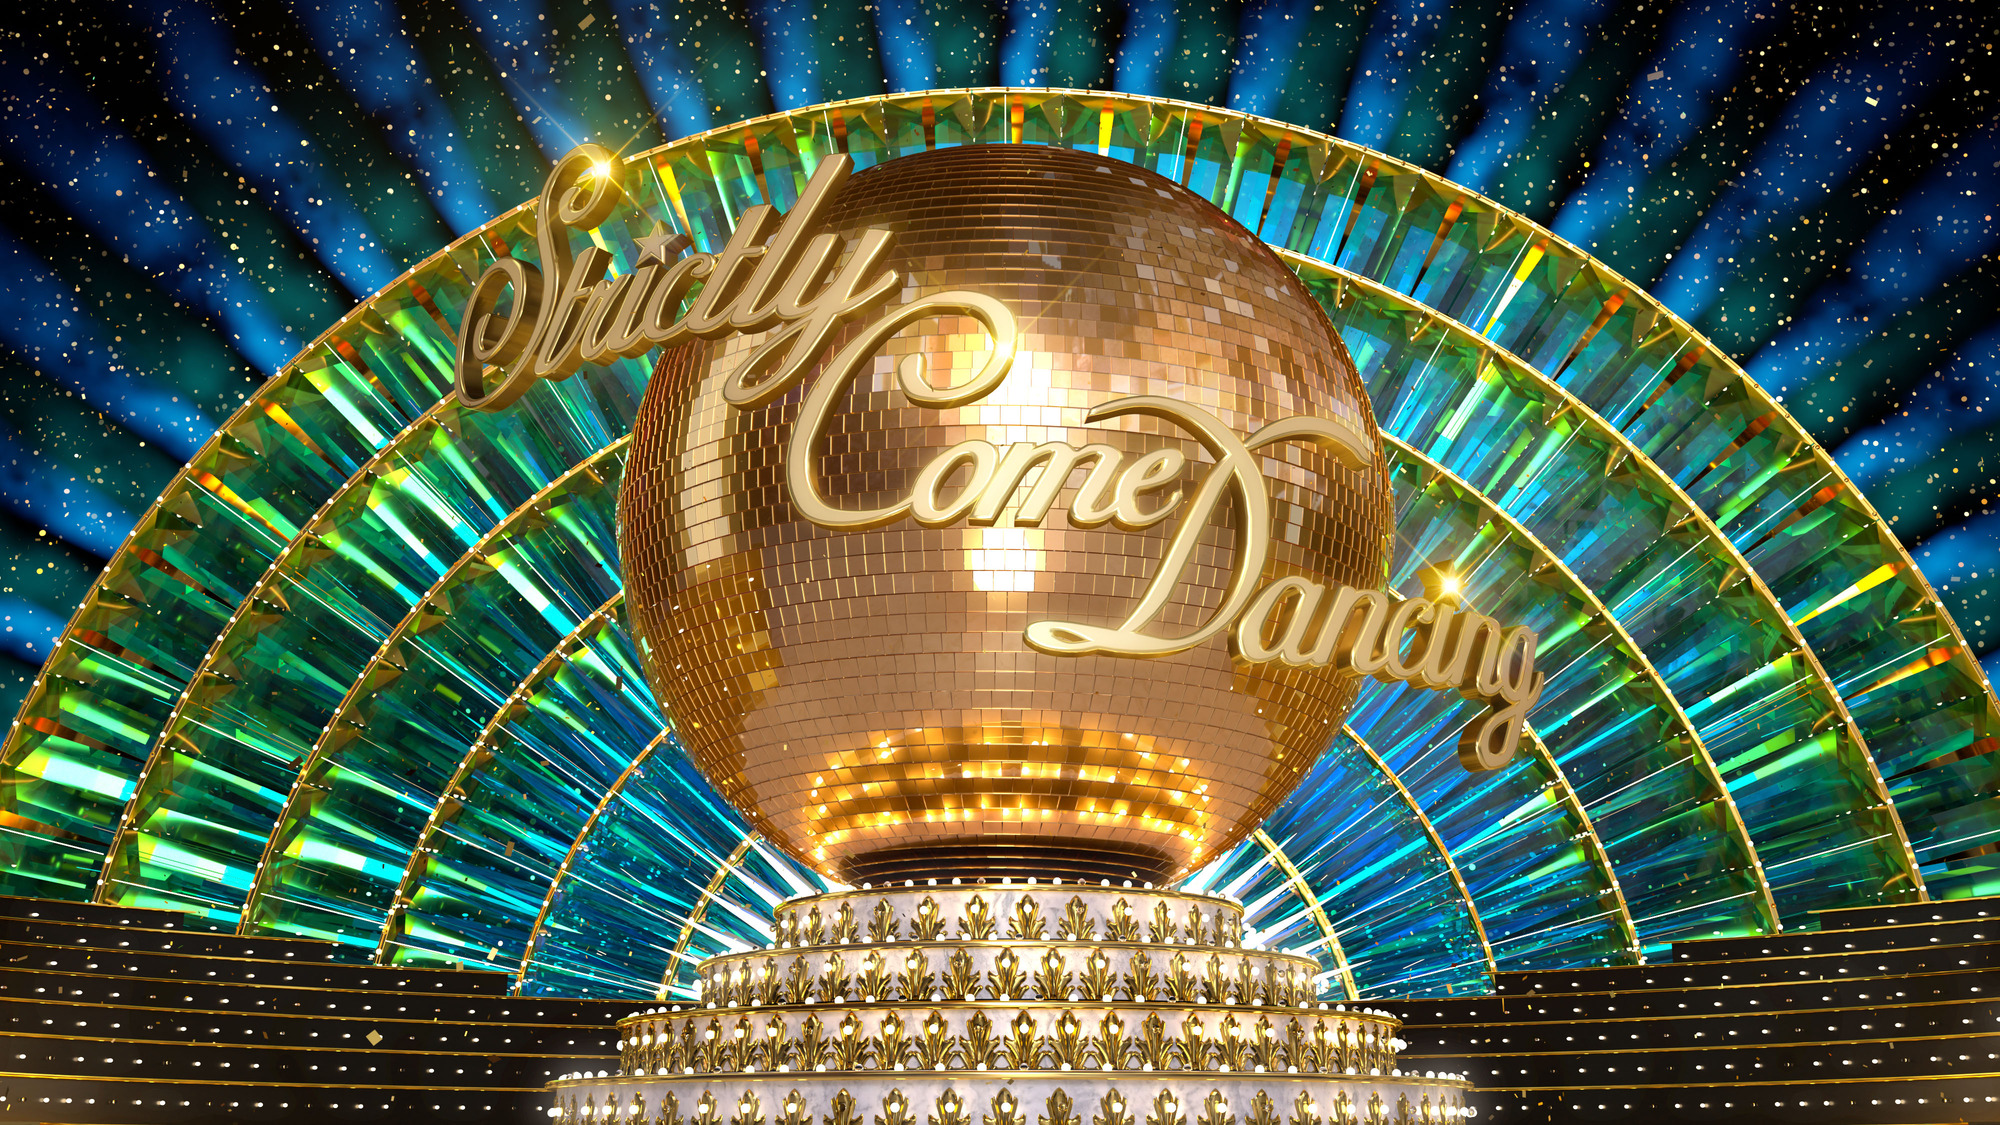 Strictly Come Dancing - When is the LIVE tour?